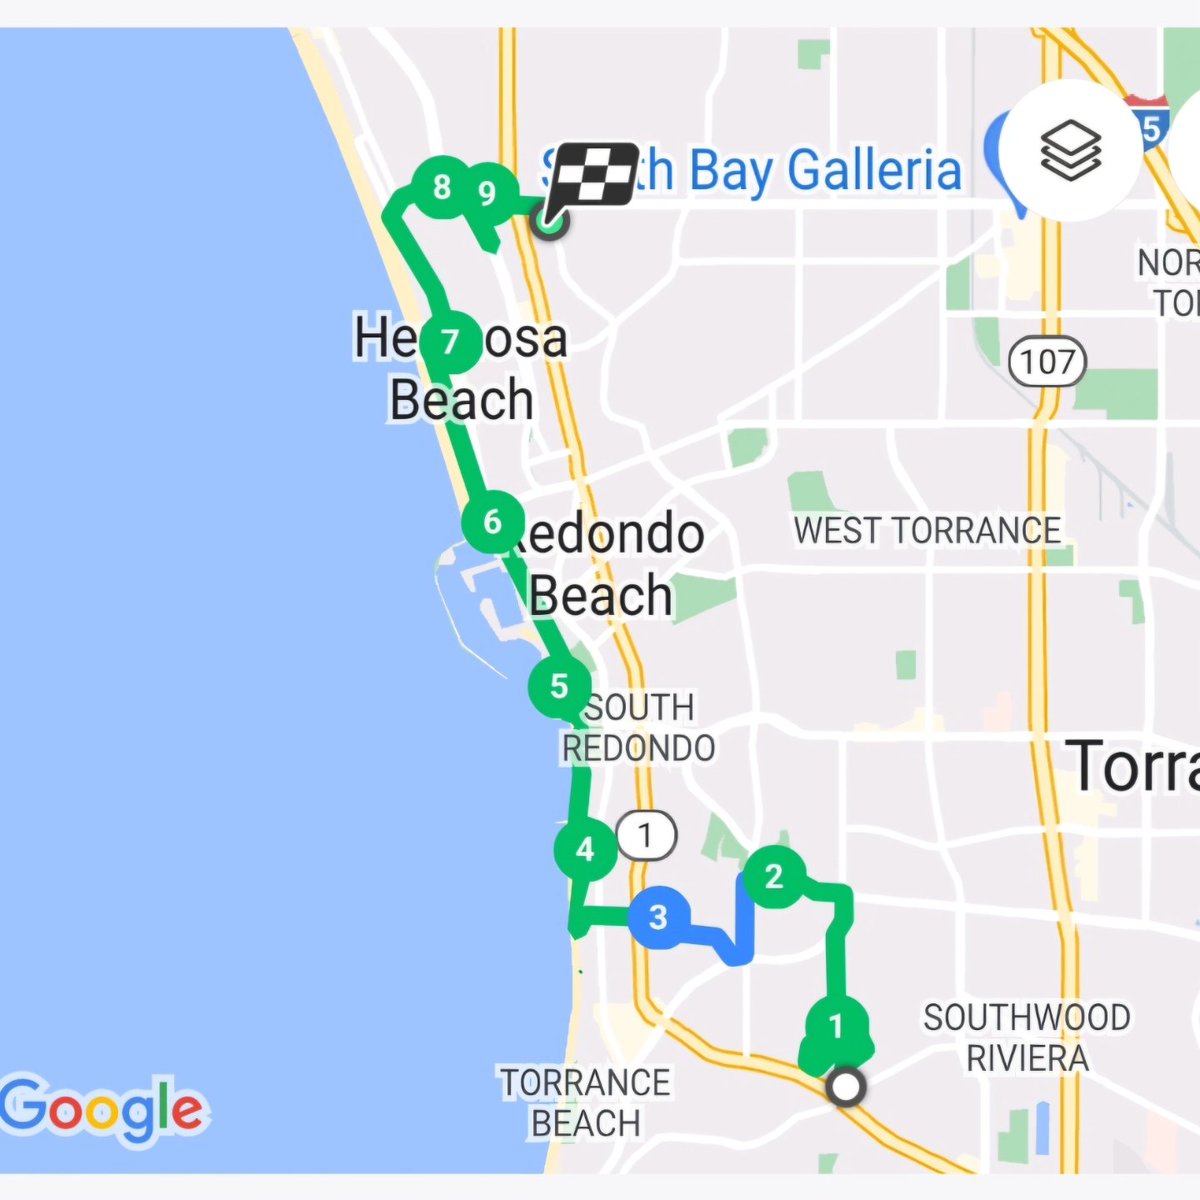 A good day to walk from Torrance to Hermorsa Beach ,6 short of 10 miles plus some stair climbing. Wow! I can't believe I've completed so many miles this month. Thank you, Laura Josefina Frisby Kitagawa, for being so inspiring!! #transplantjourney #losangeles @ReyRampollaMD